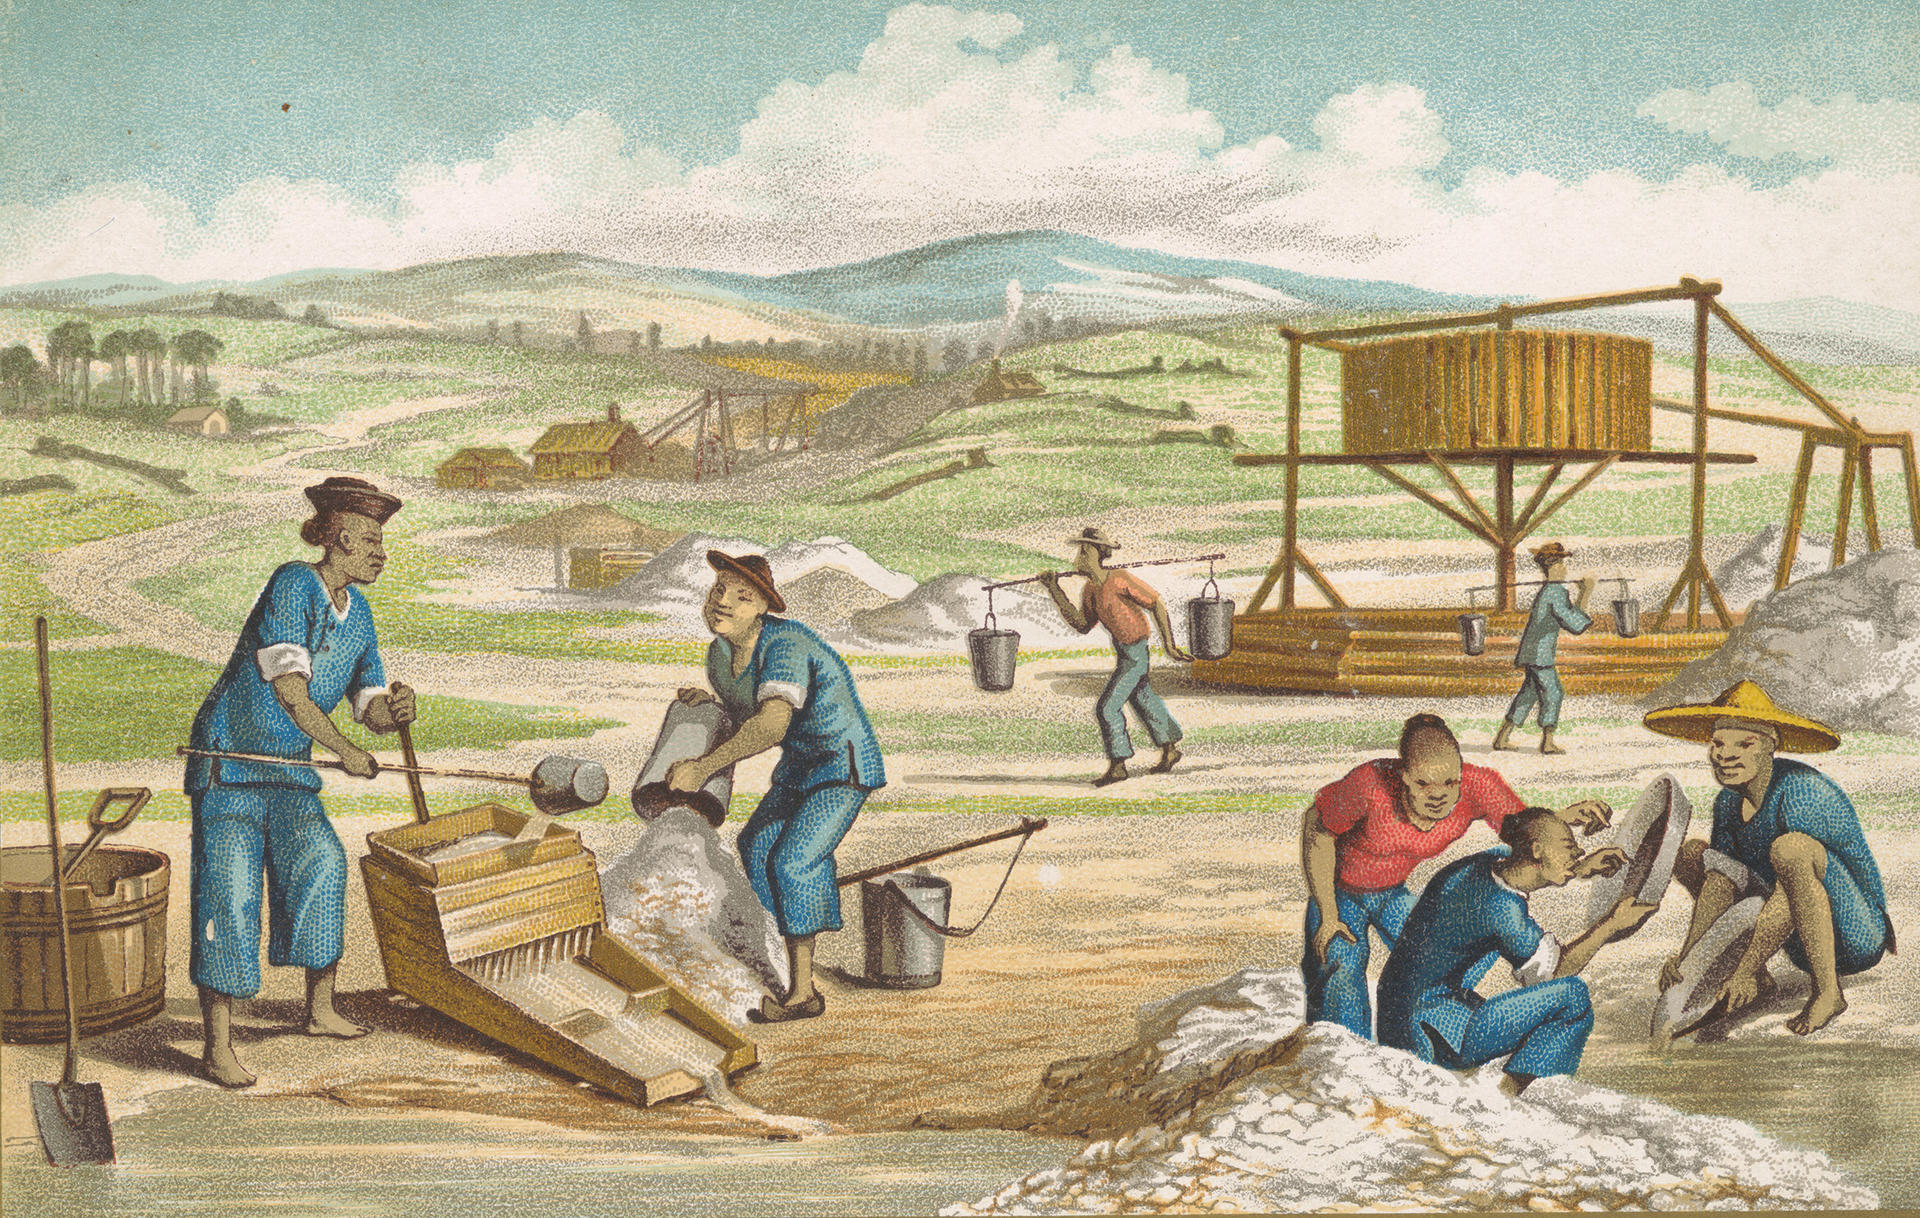 A rendering of a scene in the goldfields